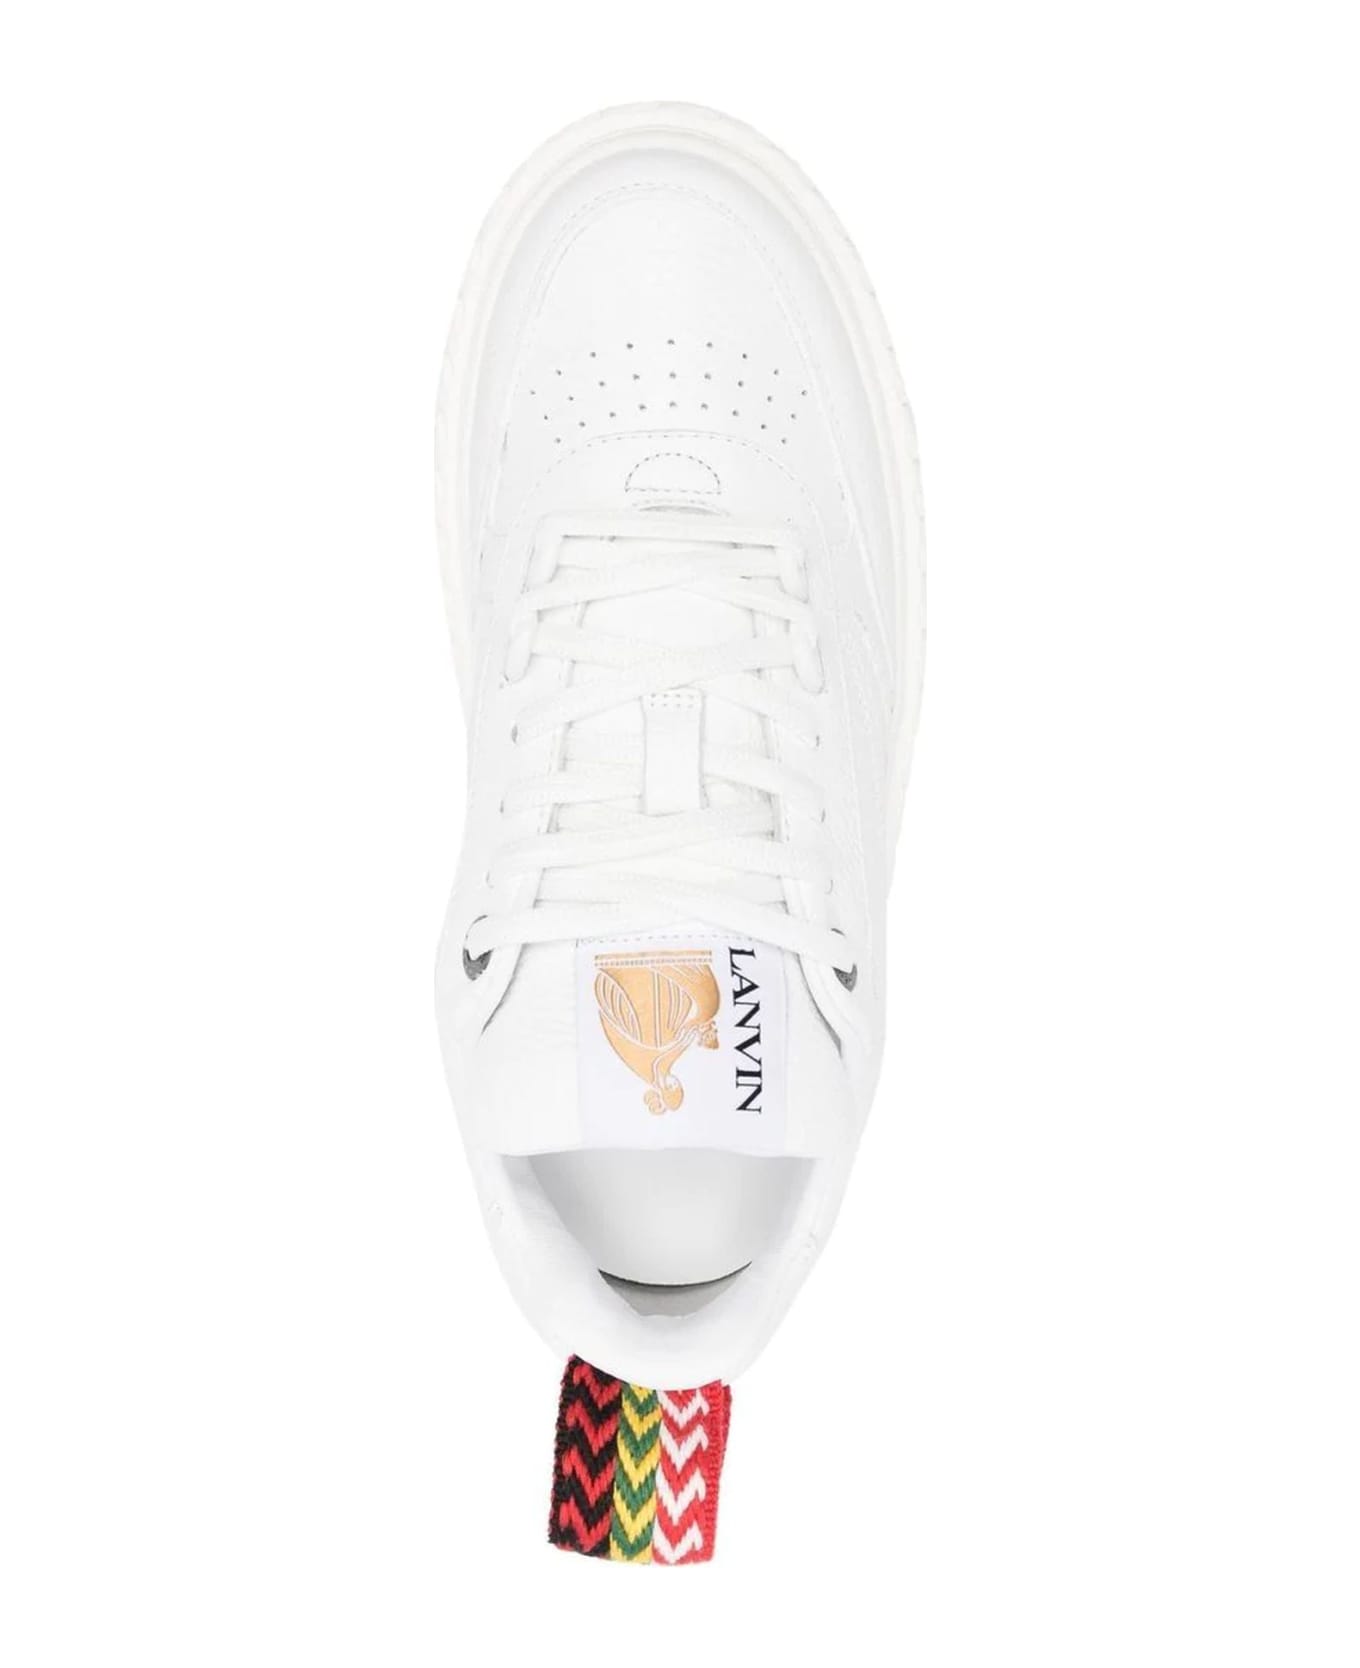 Lanvin White Curbies 2 Low-top Sneakers - White ウェッジシューズ